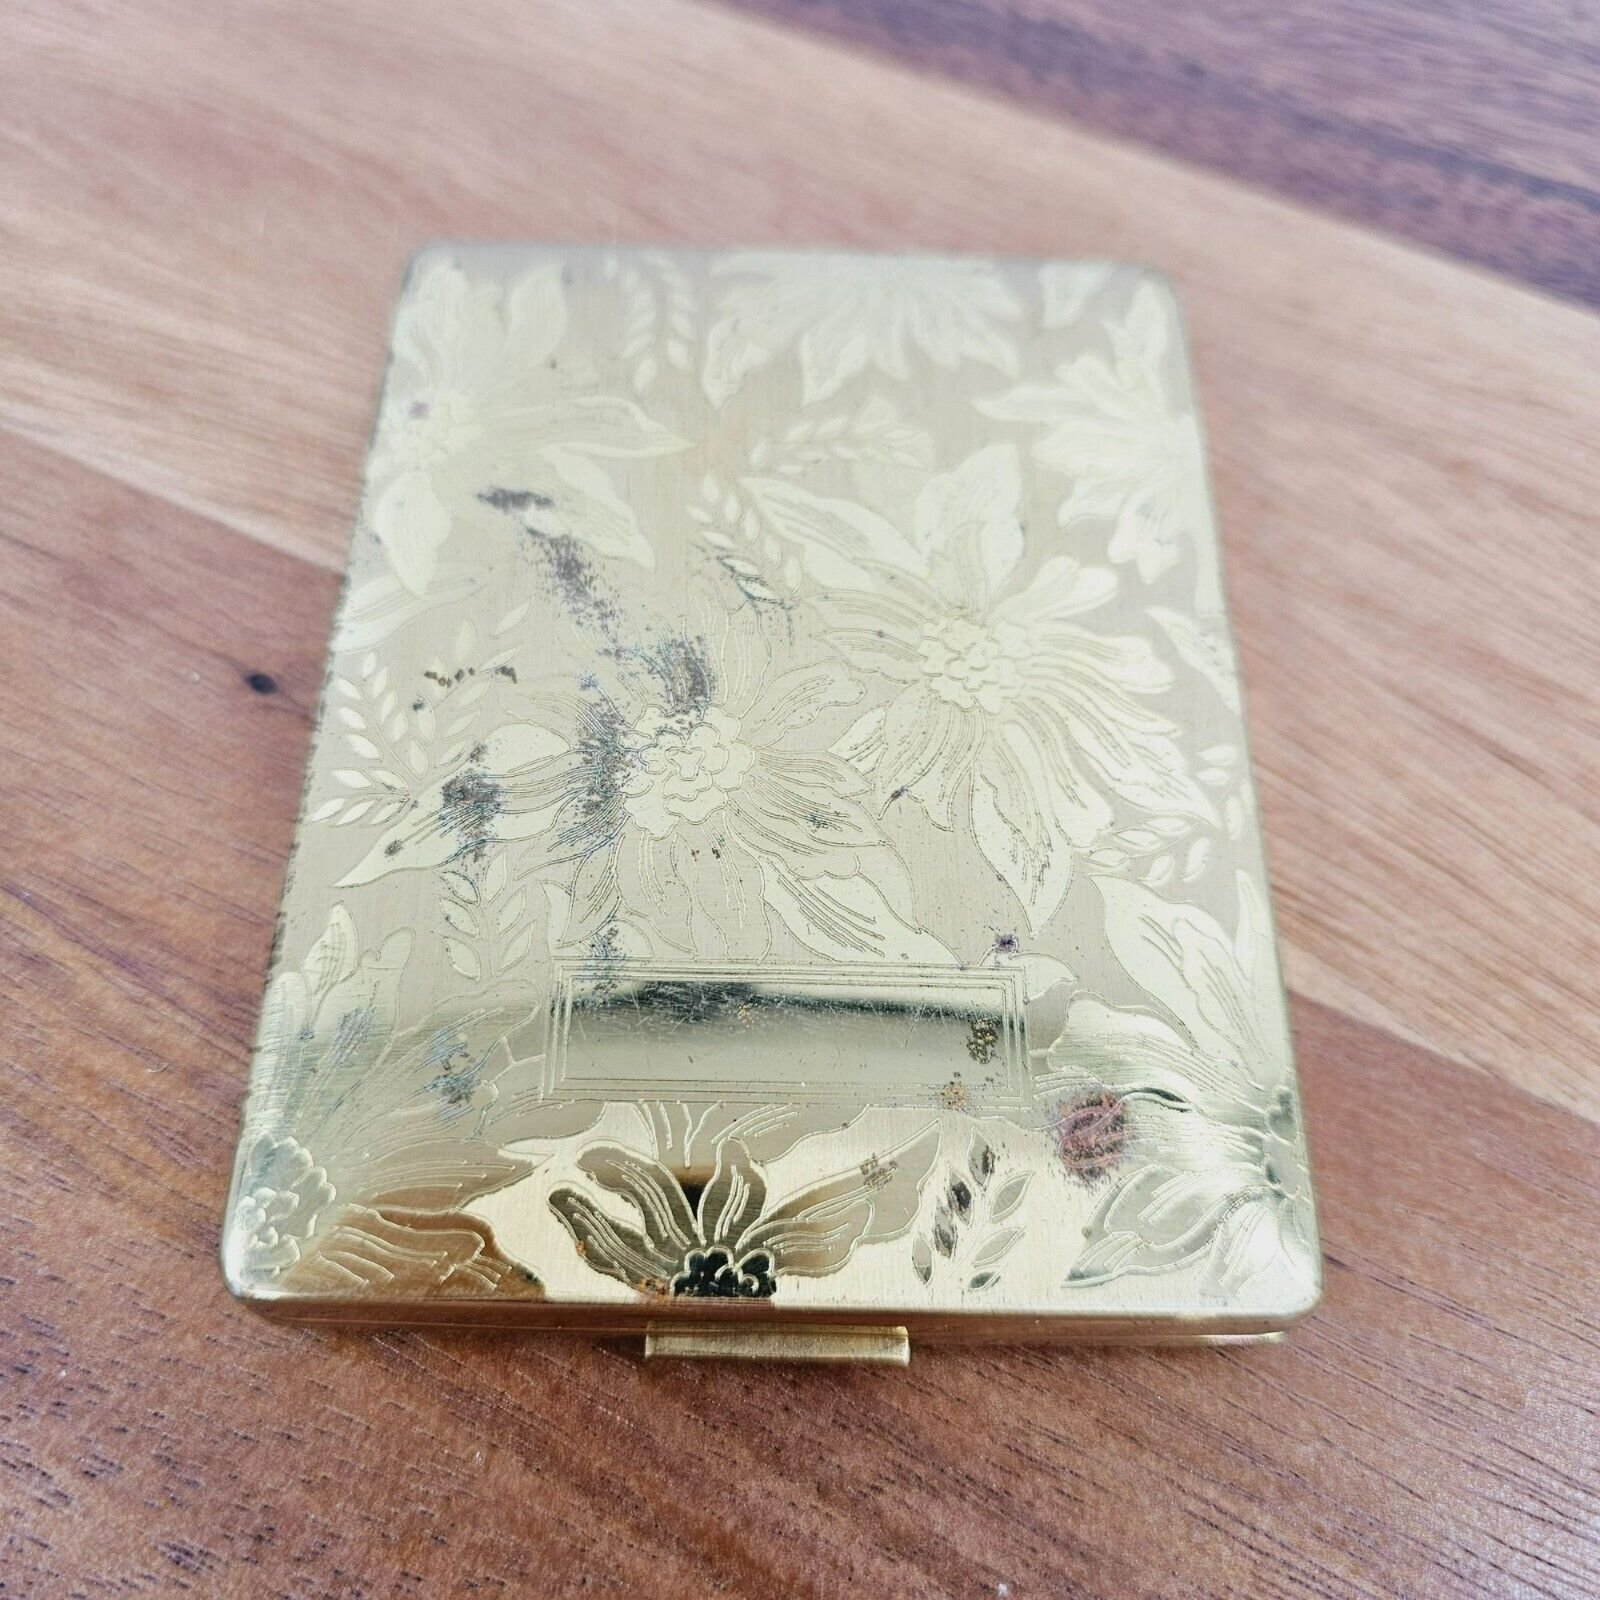 Vintage Elgin American Cigarette Case USA Made Gold Tone Metallic Etched Flowers